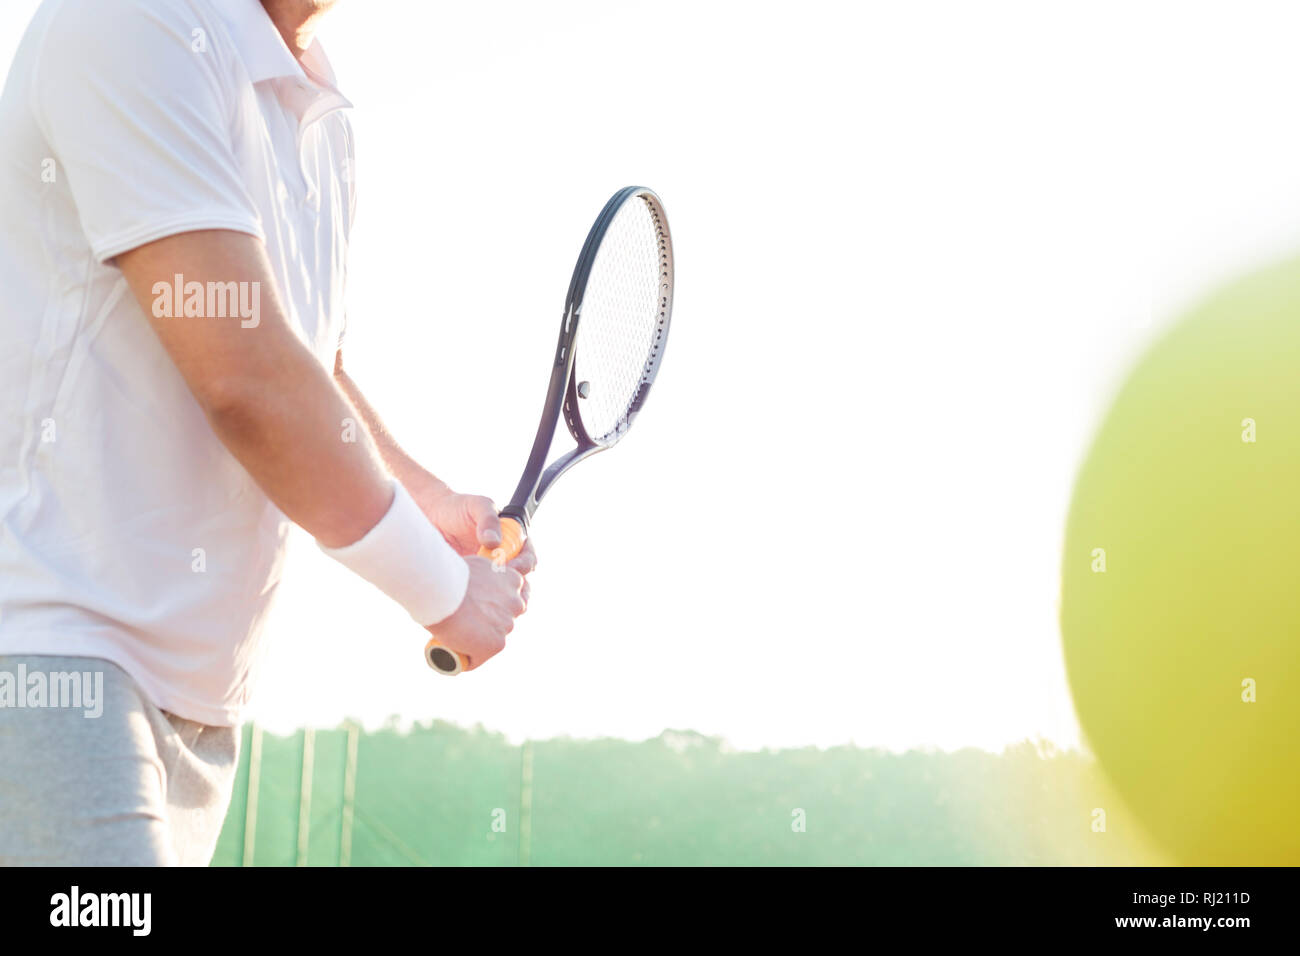 Portrait of mature man hitting tennis ball against clear sky Banque D'Images